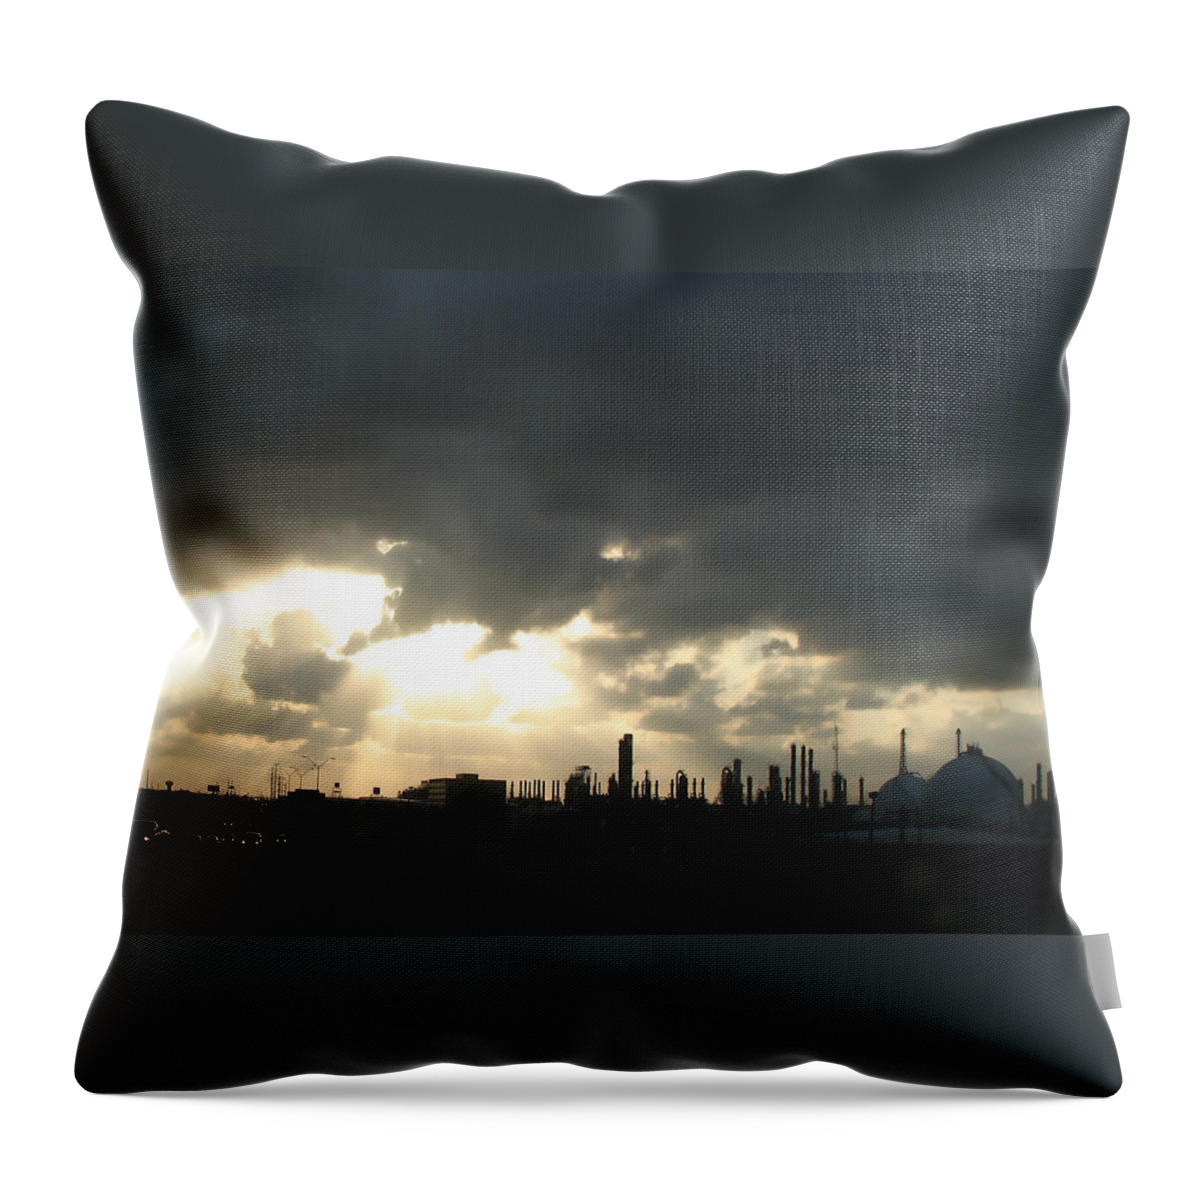 Sunbeams Throw Pillow featuring the photograph Houston Refinery at Dusk by Connie Fox